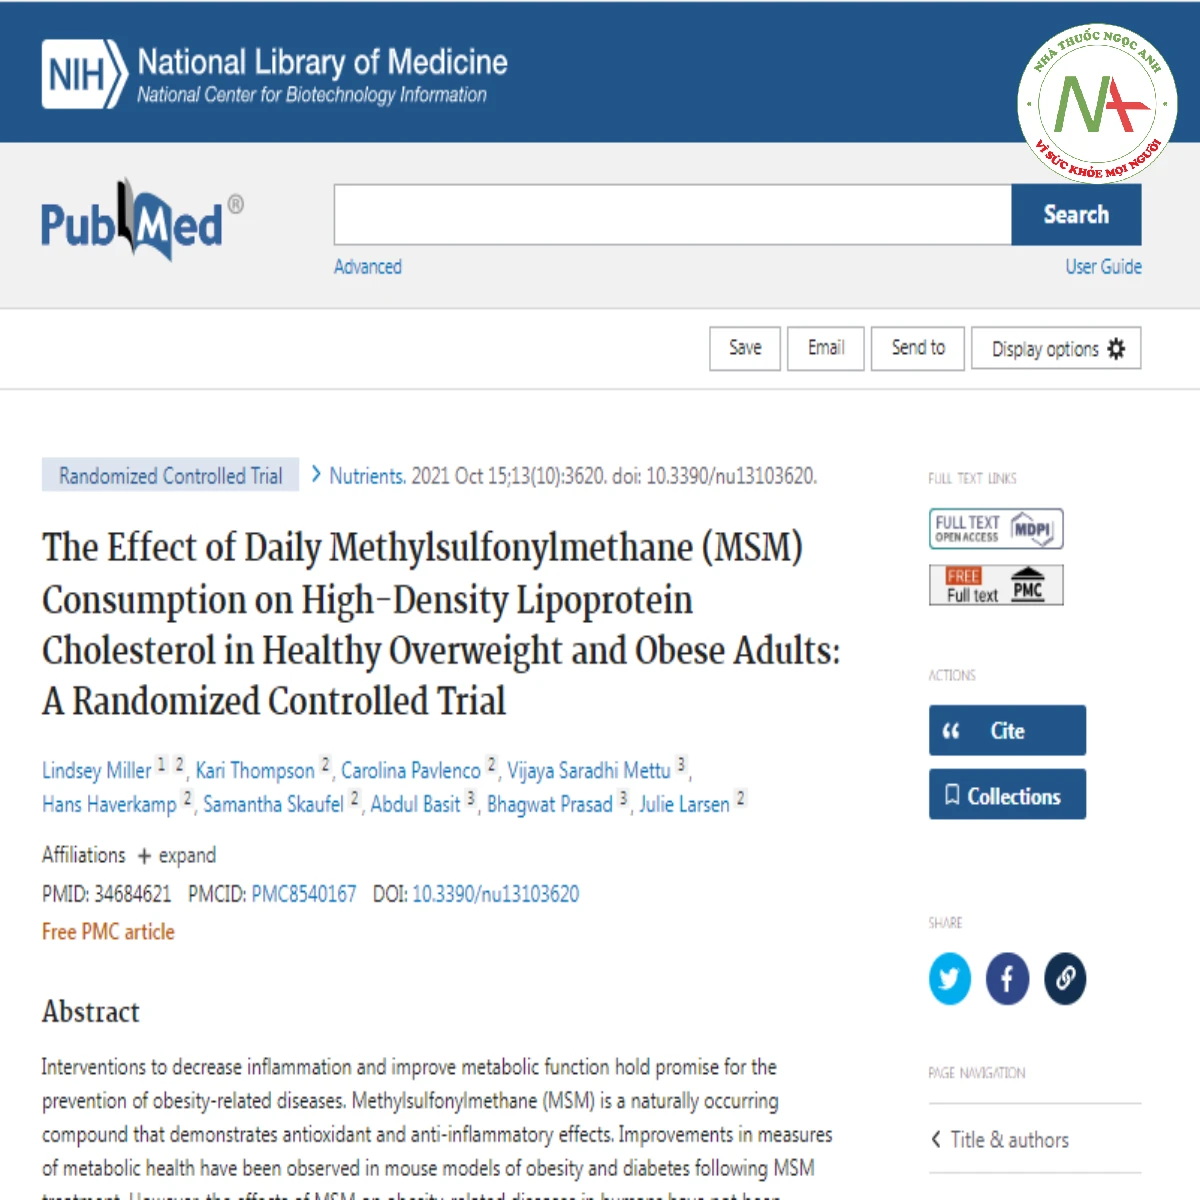 The Effect of Daily Methylsulfonylmethane (MSM) Consumption on High-Density Lipoprotein Cholesterol in Healthy Overweight and Obese Adults: A Randomized Controlled Trial